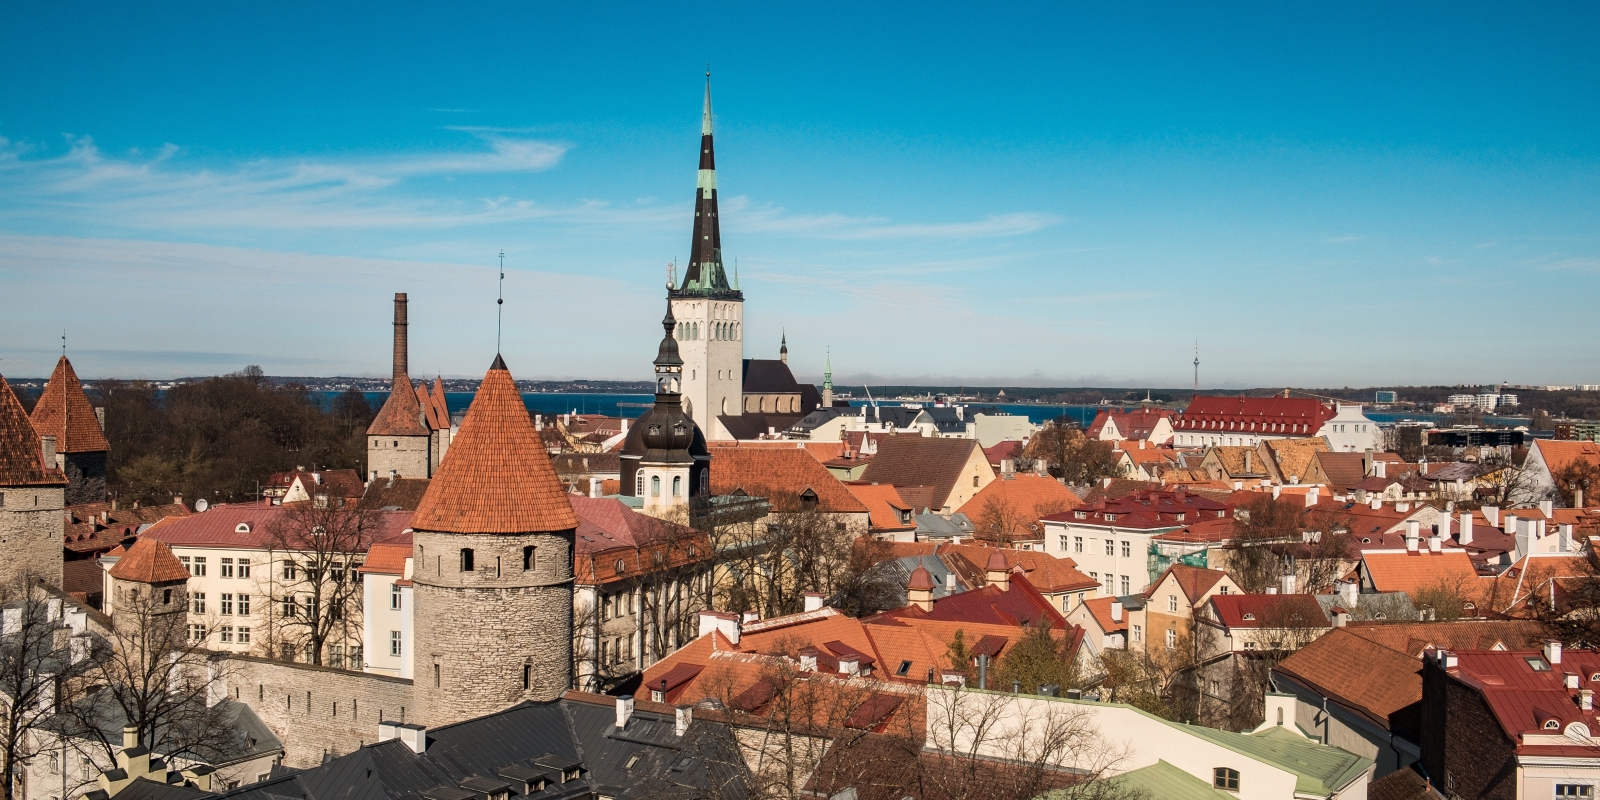 Facts about the business environment and the benefits of investing in Estonia